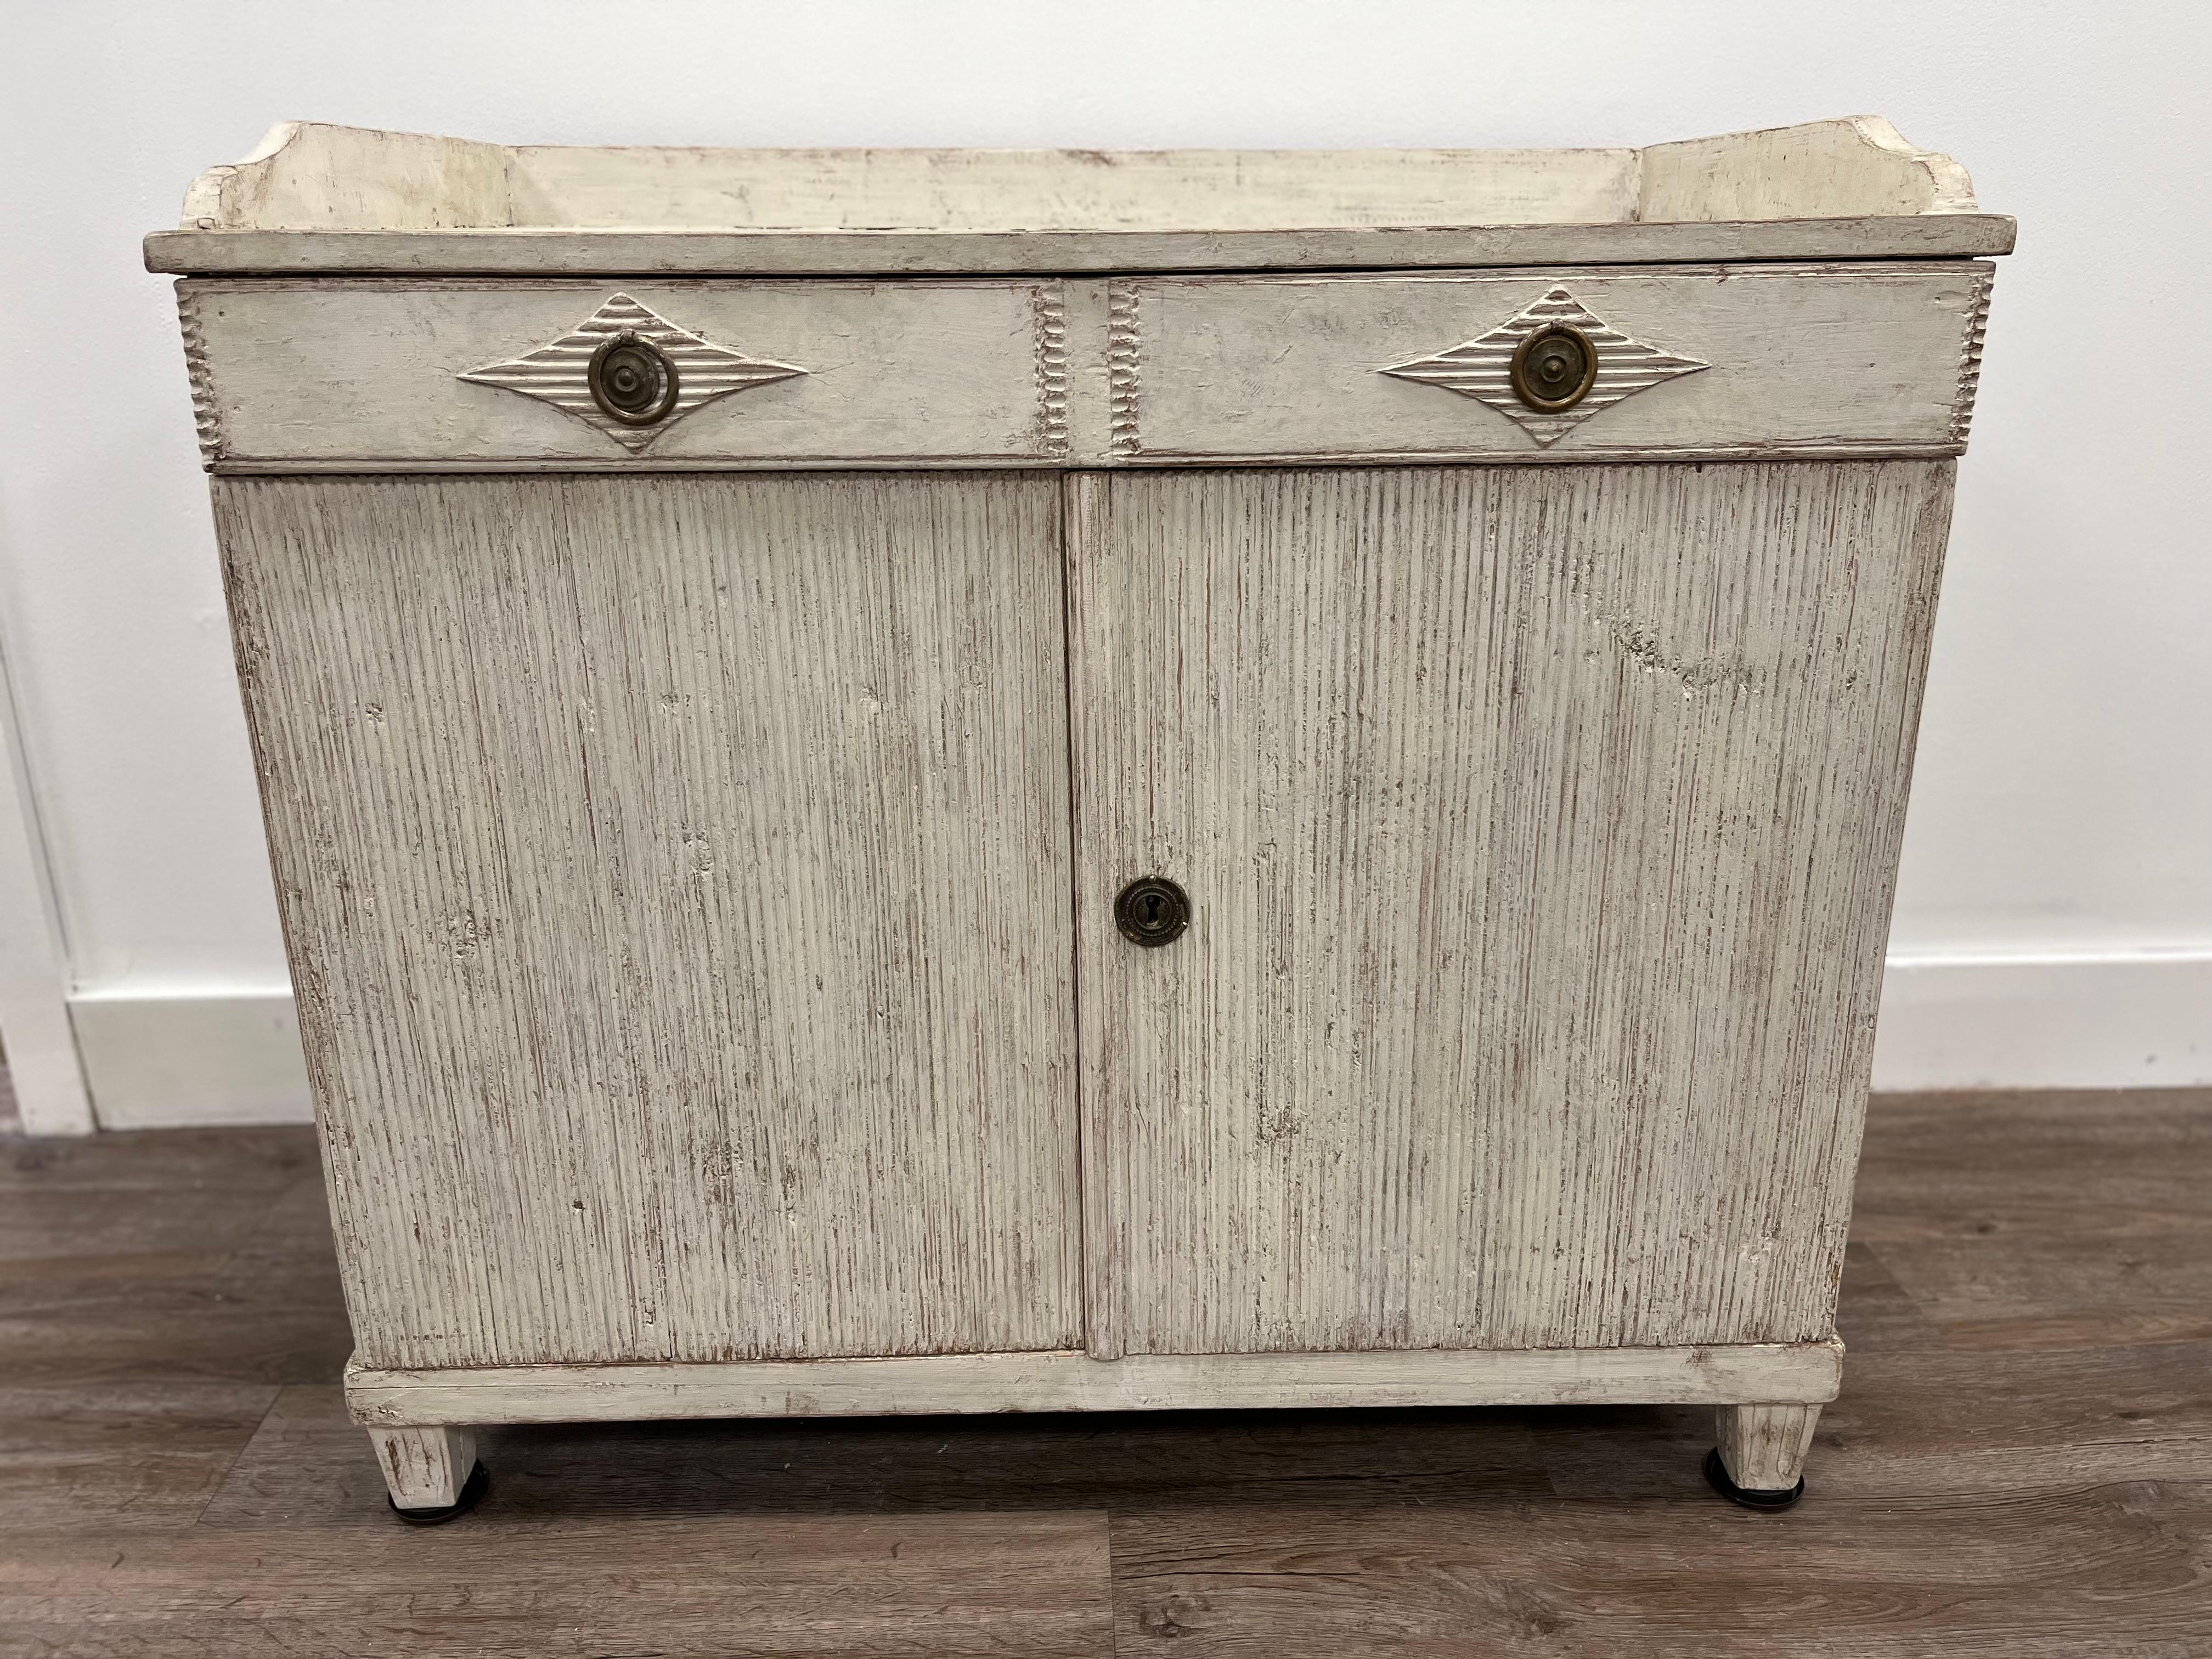 A small provincial Gustavian Style sideboard with original hardware and repainted in light grey. One wide drawer with two reeded diamond-shaped details on the pulls. Sits atop two vertically reeded cabinet doors. Inside, two shelves.